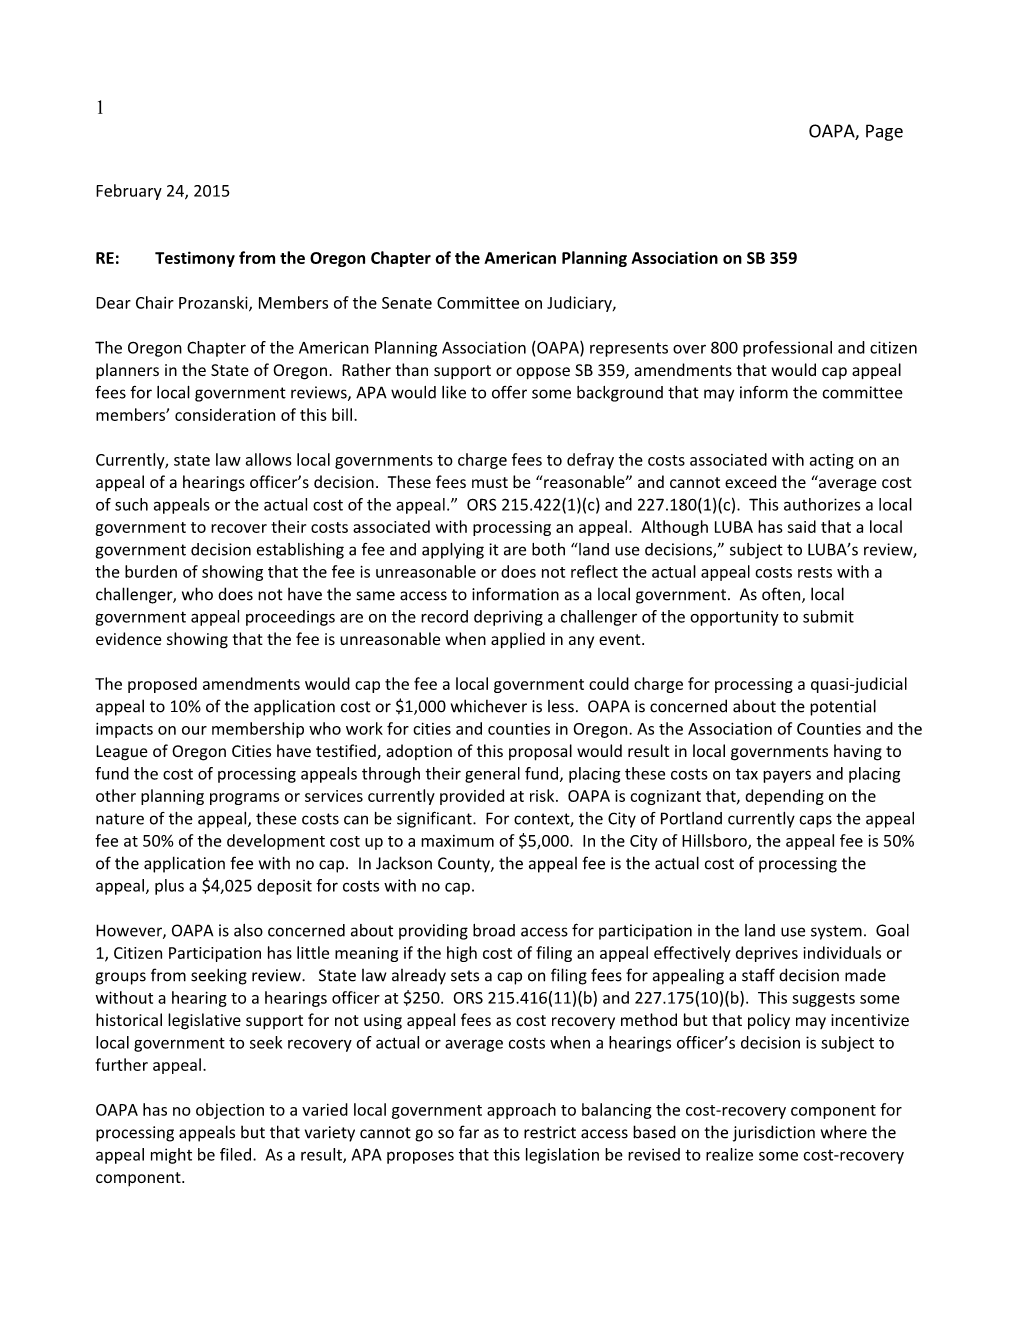 RE: Testimony from the Oregon Chapter of the American Planning Association on SB 359